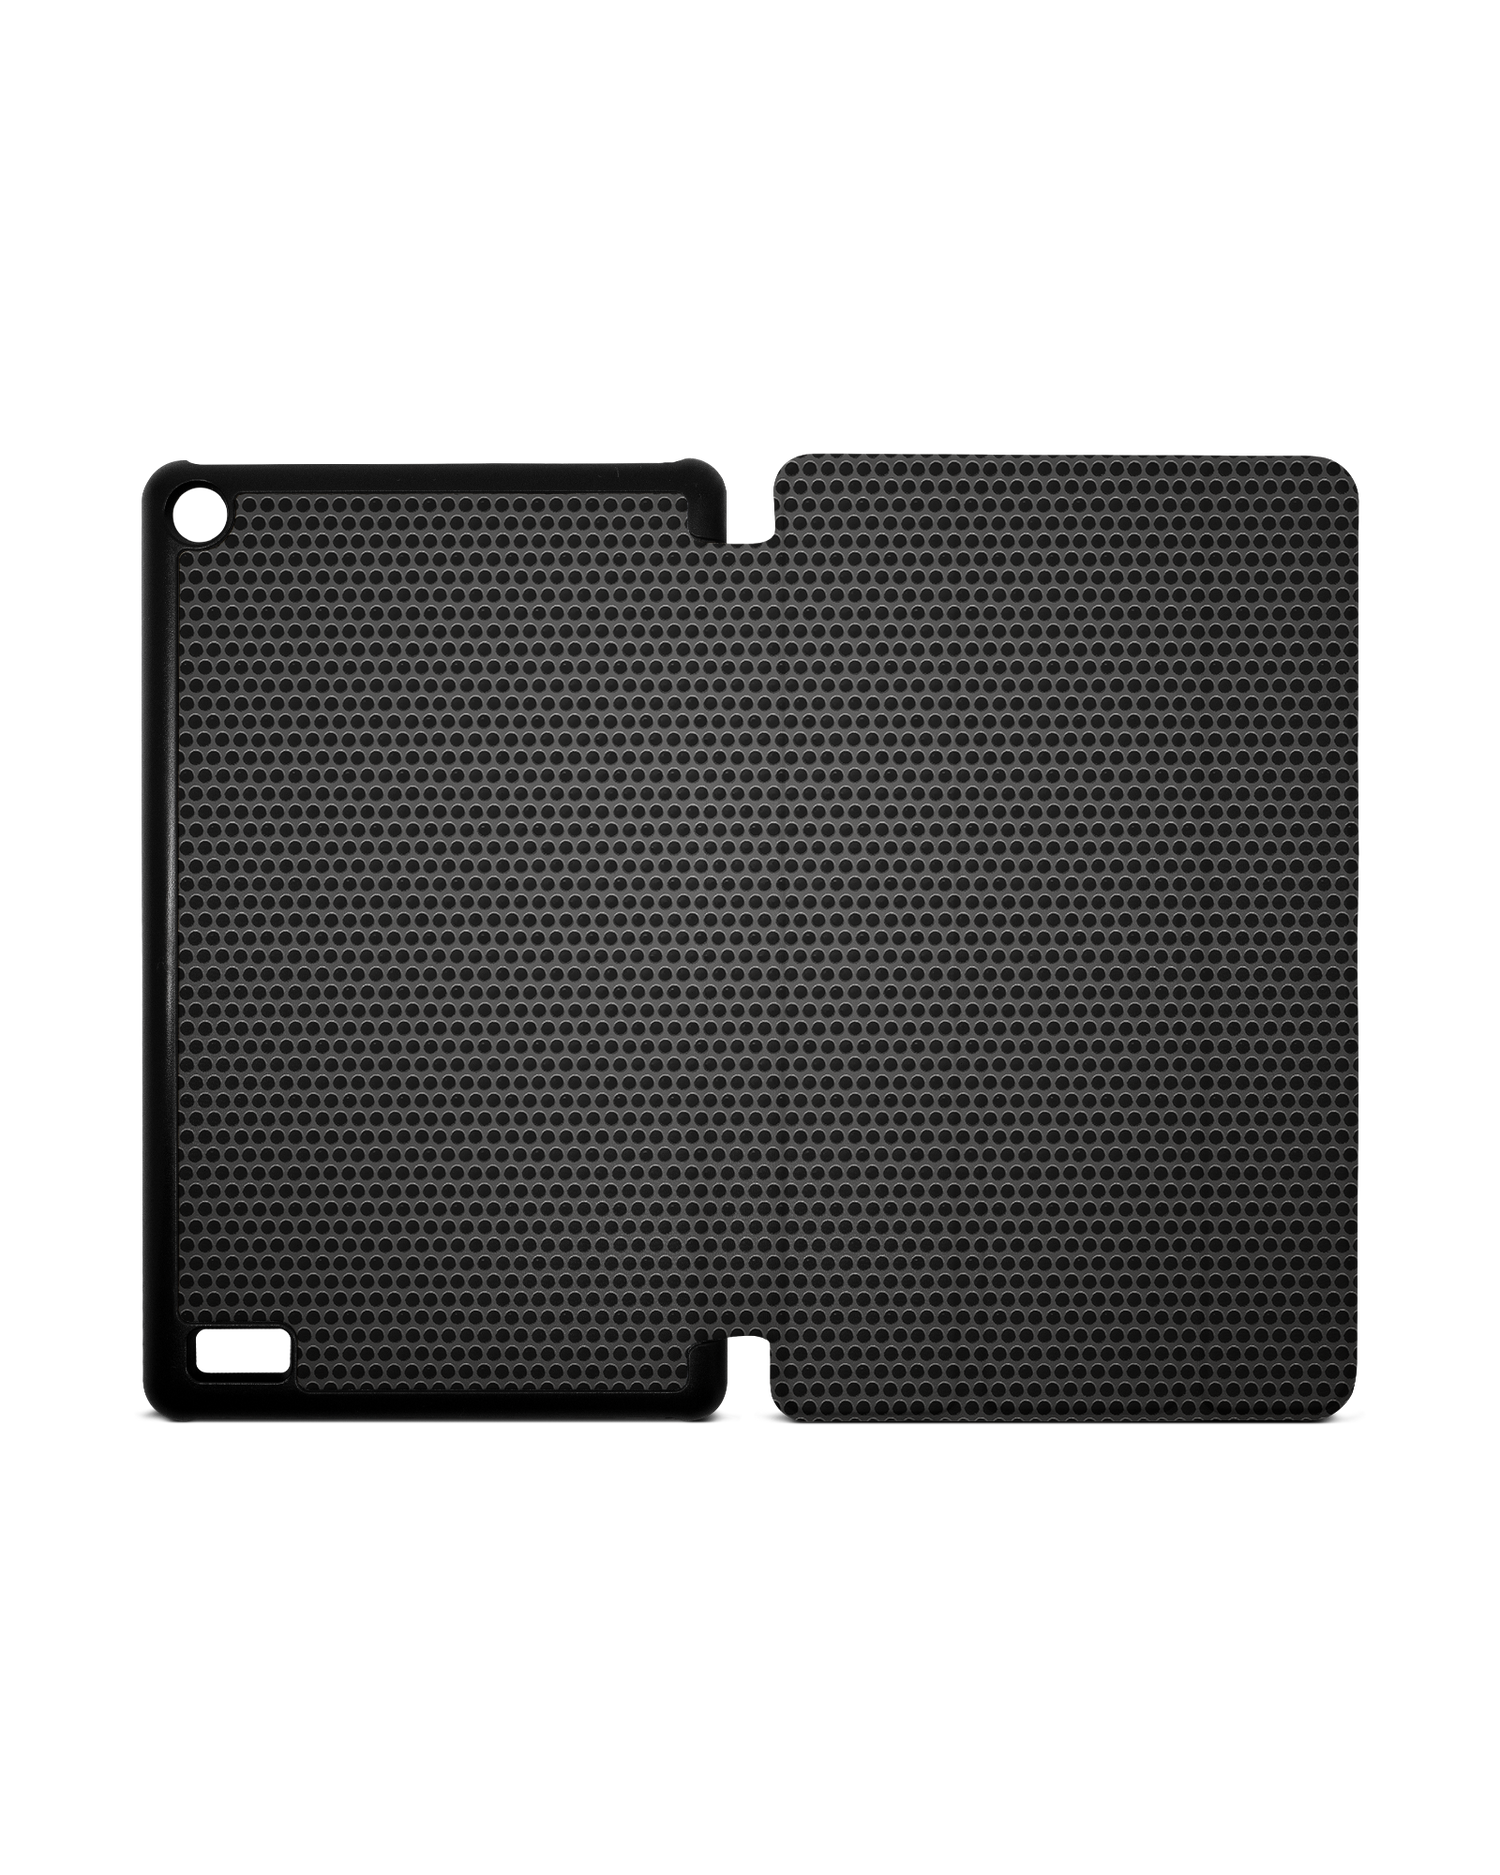 Carbon II Tablet Smart Case for Amazon Fire 7: Opened